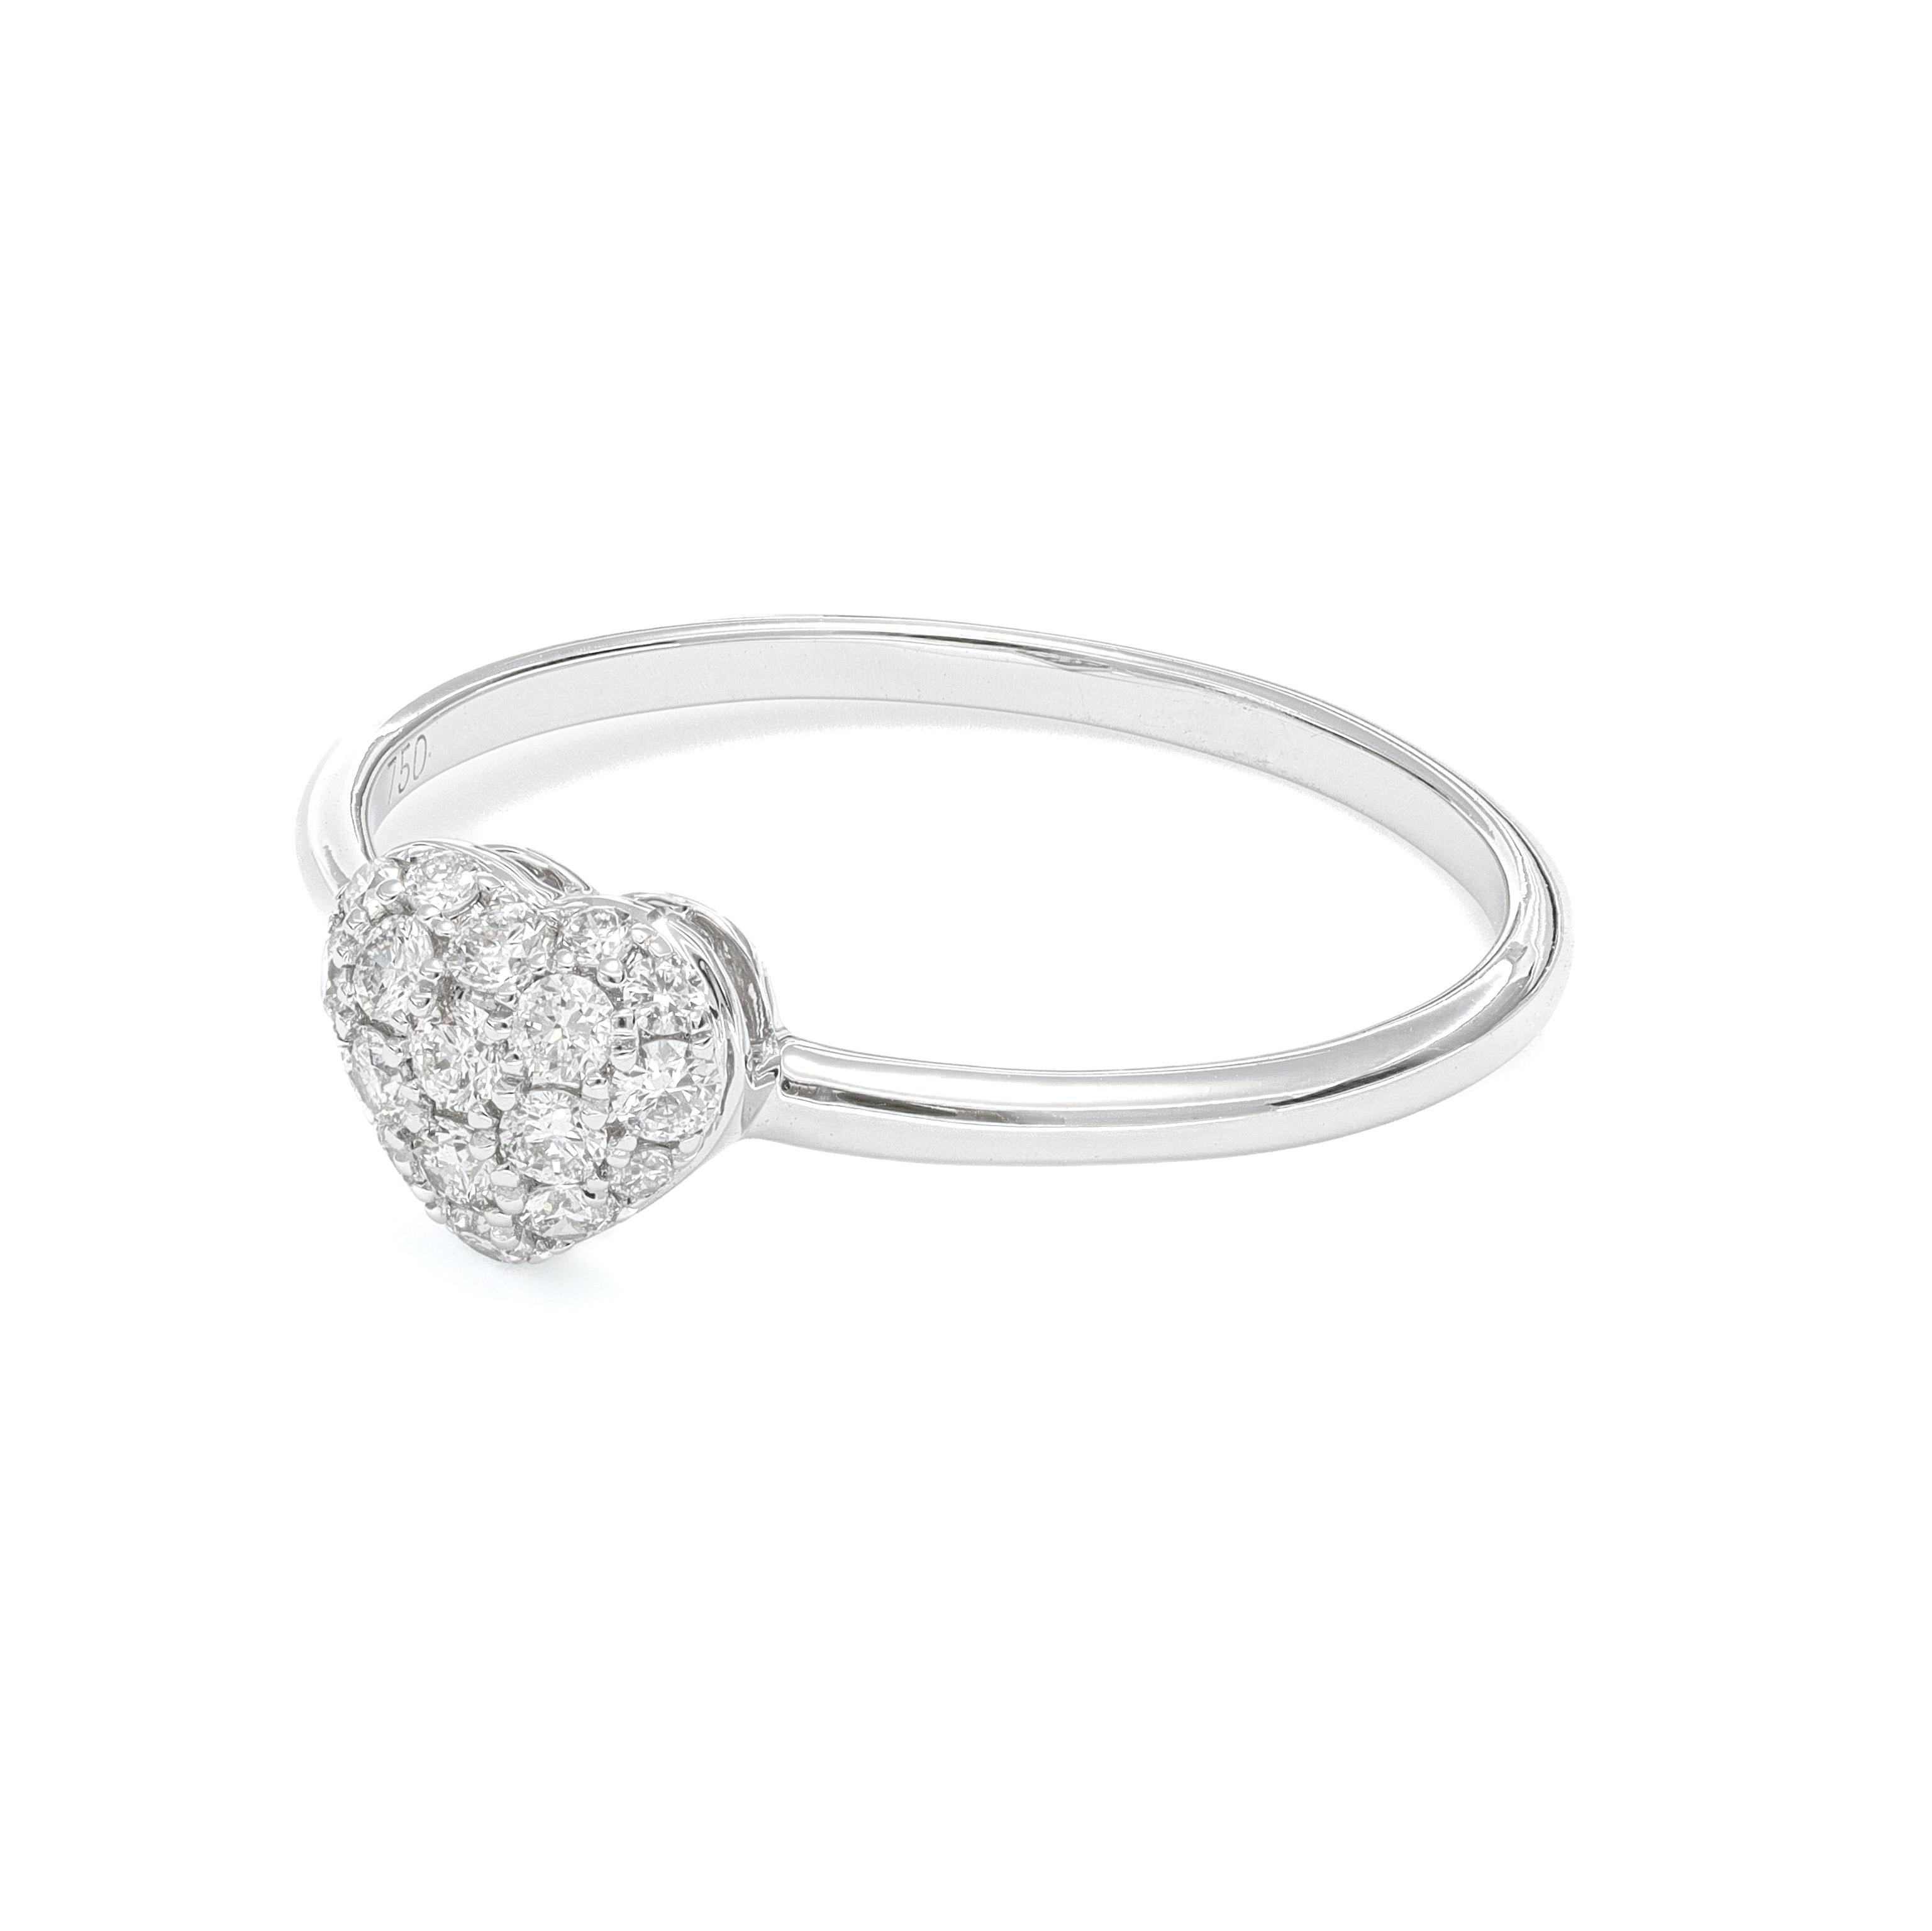 We are delighted to introduce our heart-shaped diamond ring—a symbol of love, commitment, and cherished promises. Crafted in radiant 18 KT White Gold and adorned with 0.26 carats of sparkling diamonds, this ring embodies the essence of simplicity